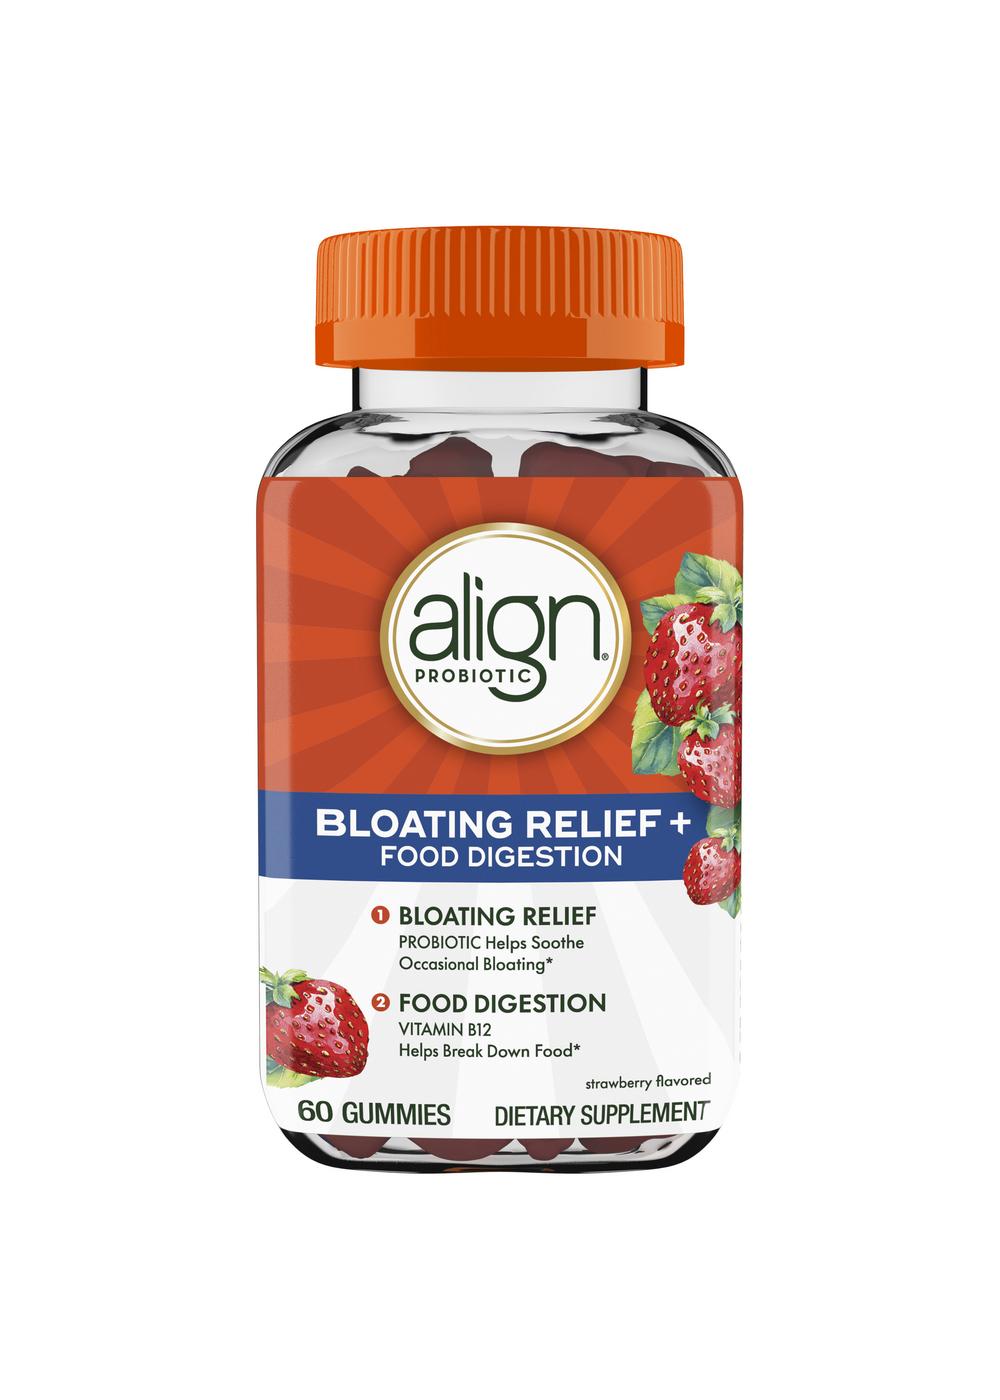 Align Probiotic Bloating Relief + Food Digestion Gummies - Strawberry; image 1 of 2